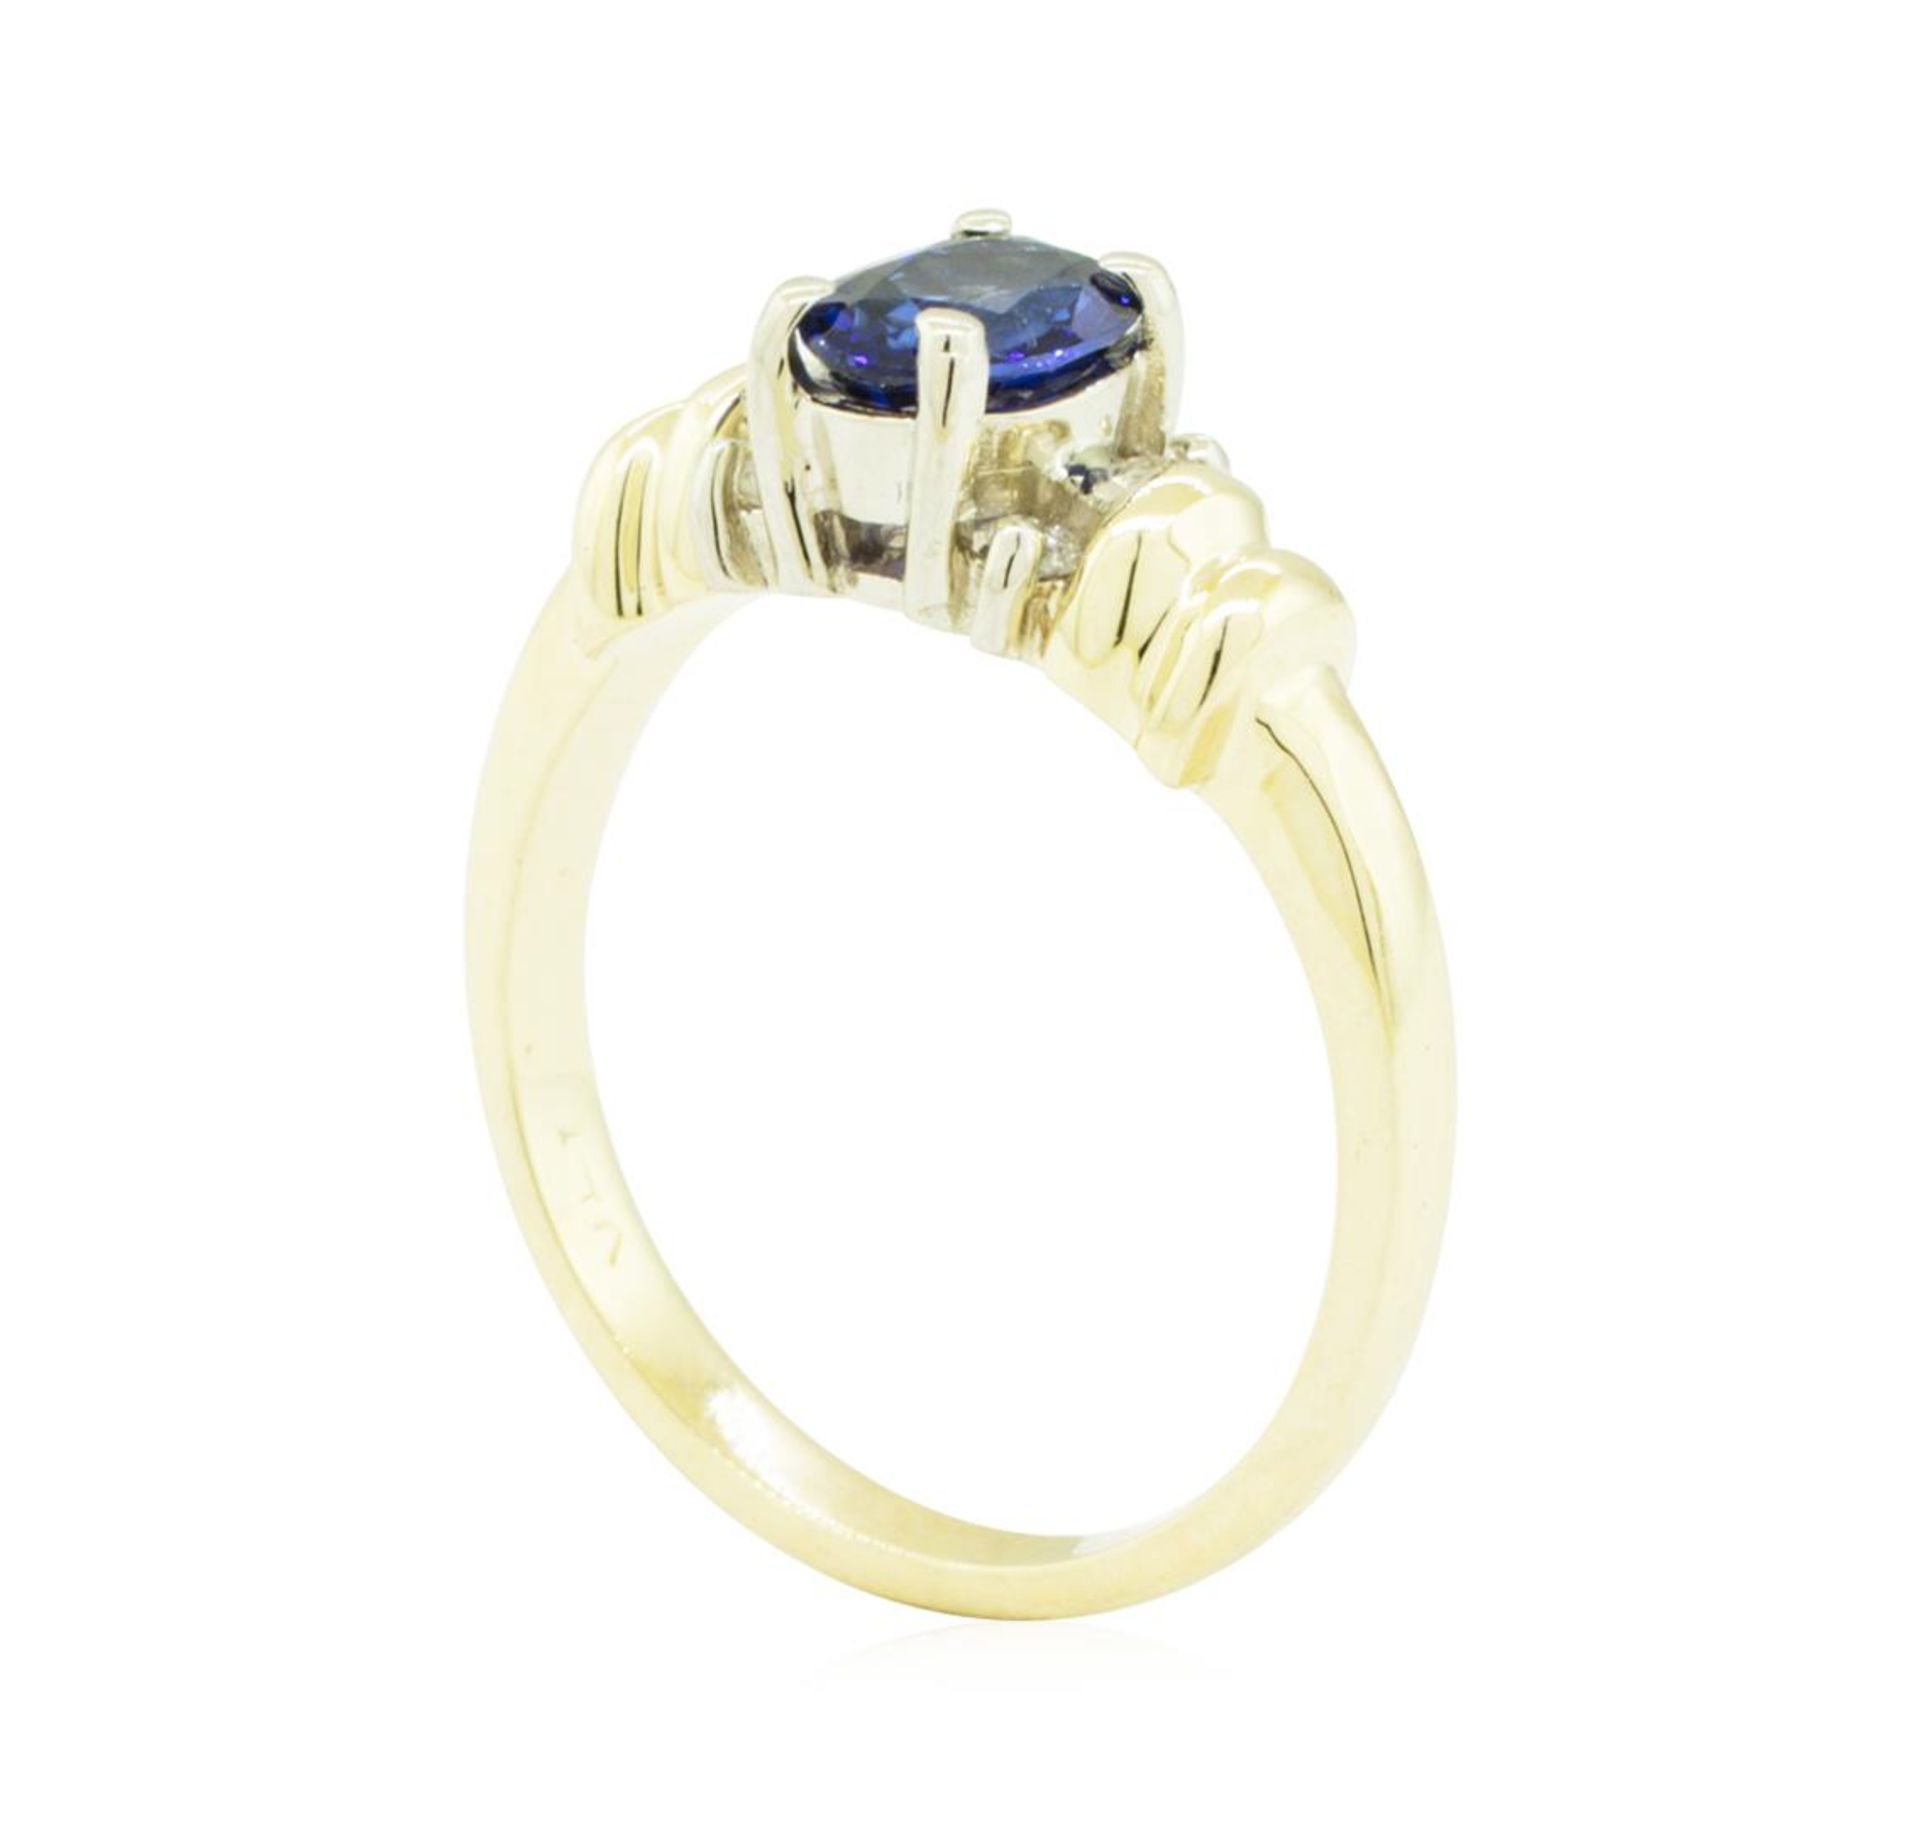 1.00 ctw Blue Sapphire and Diamond Ring - 14KT Yellow and White Gold - Image 4 of 4